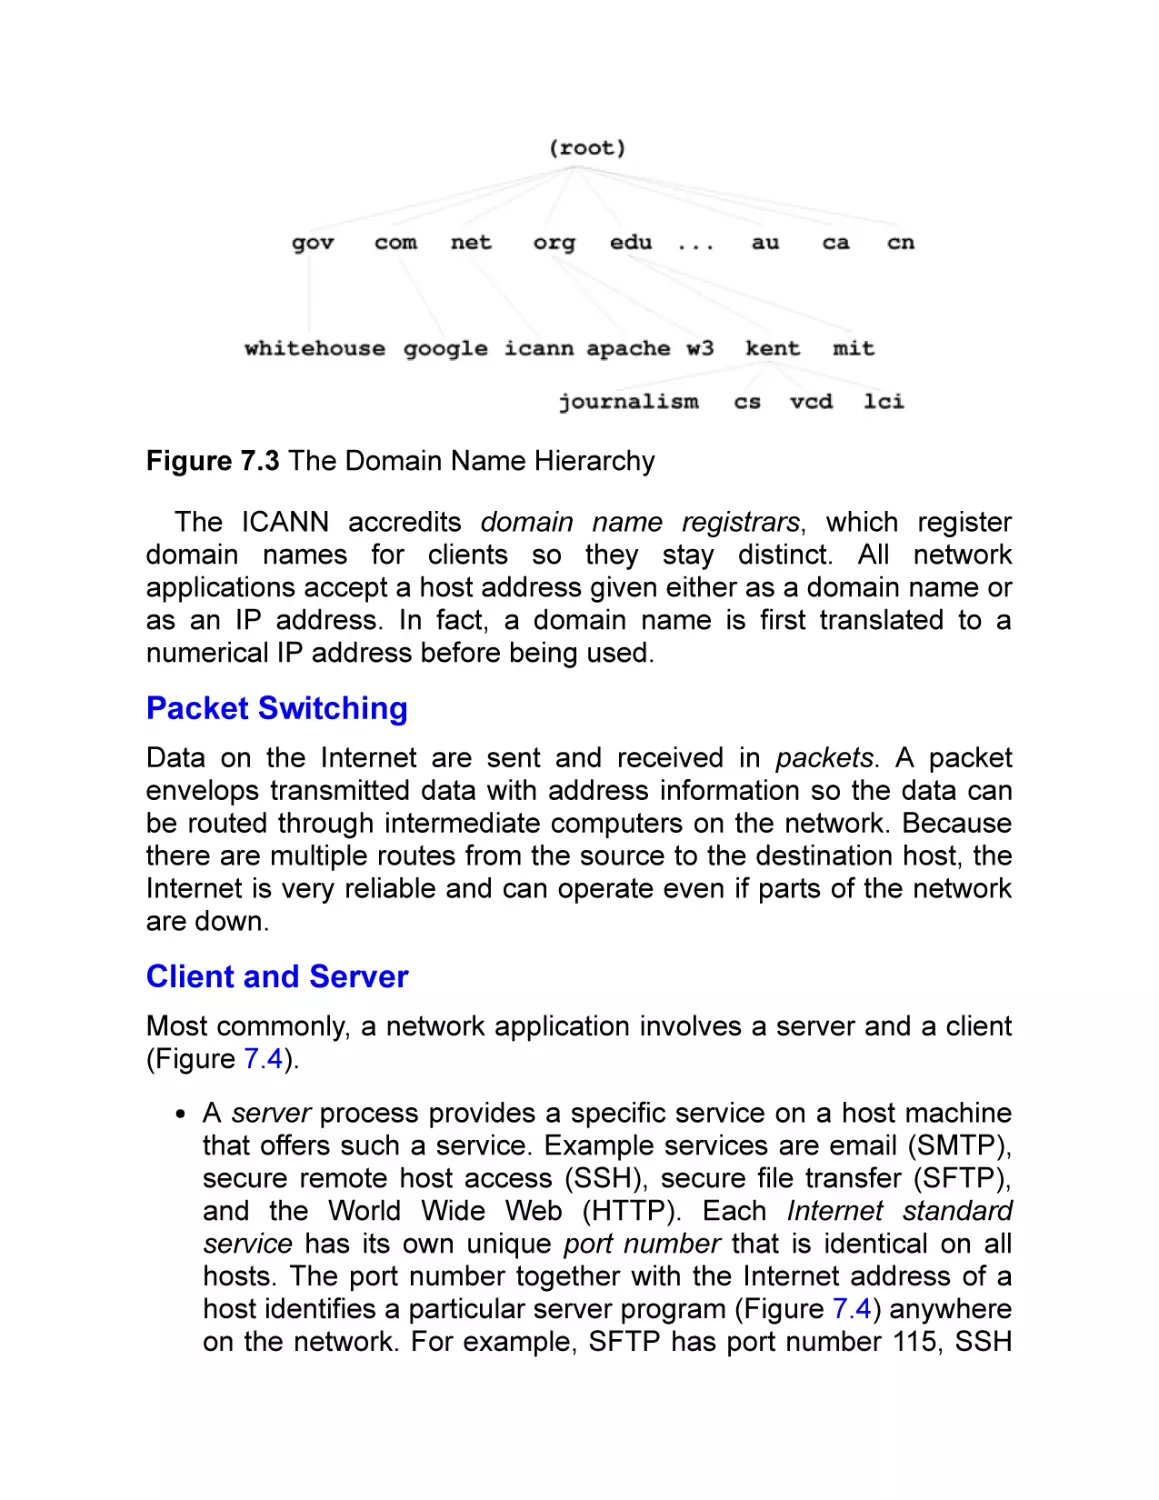 Packet Switching
Client and Server